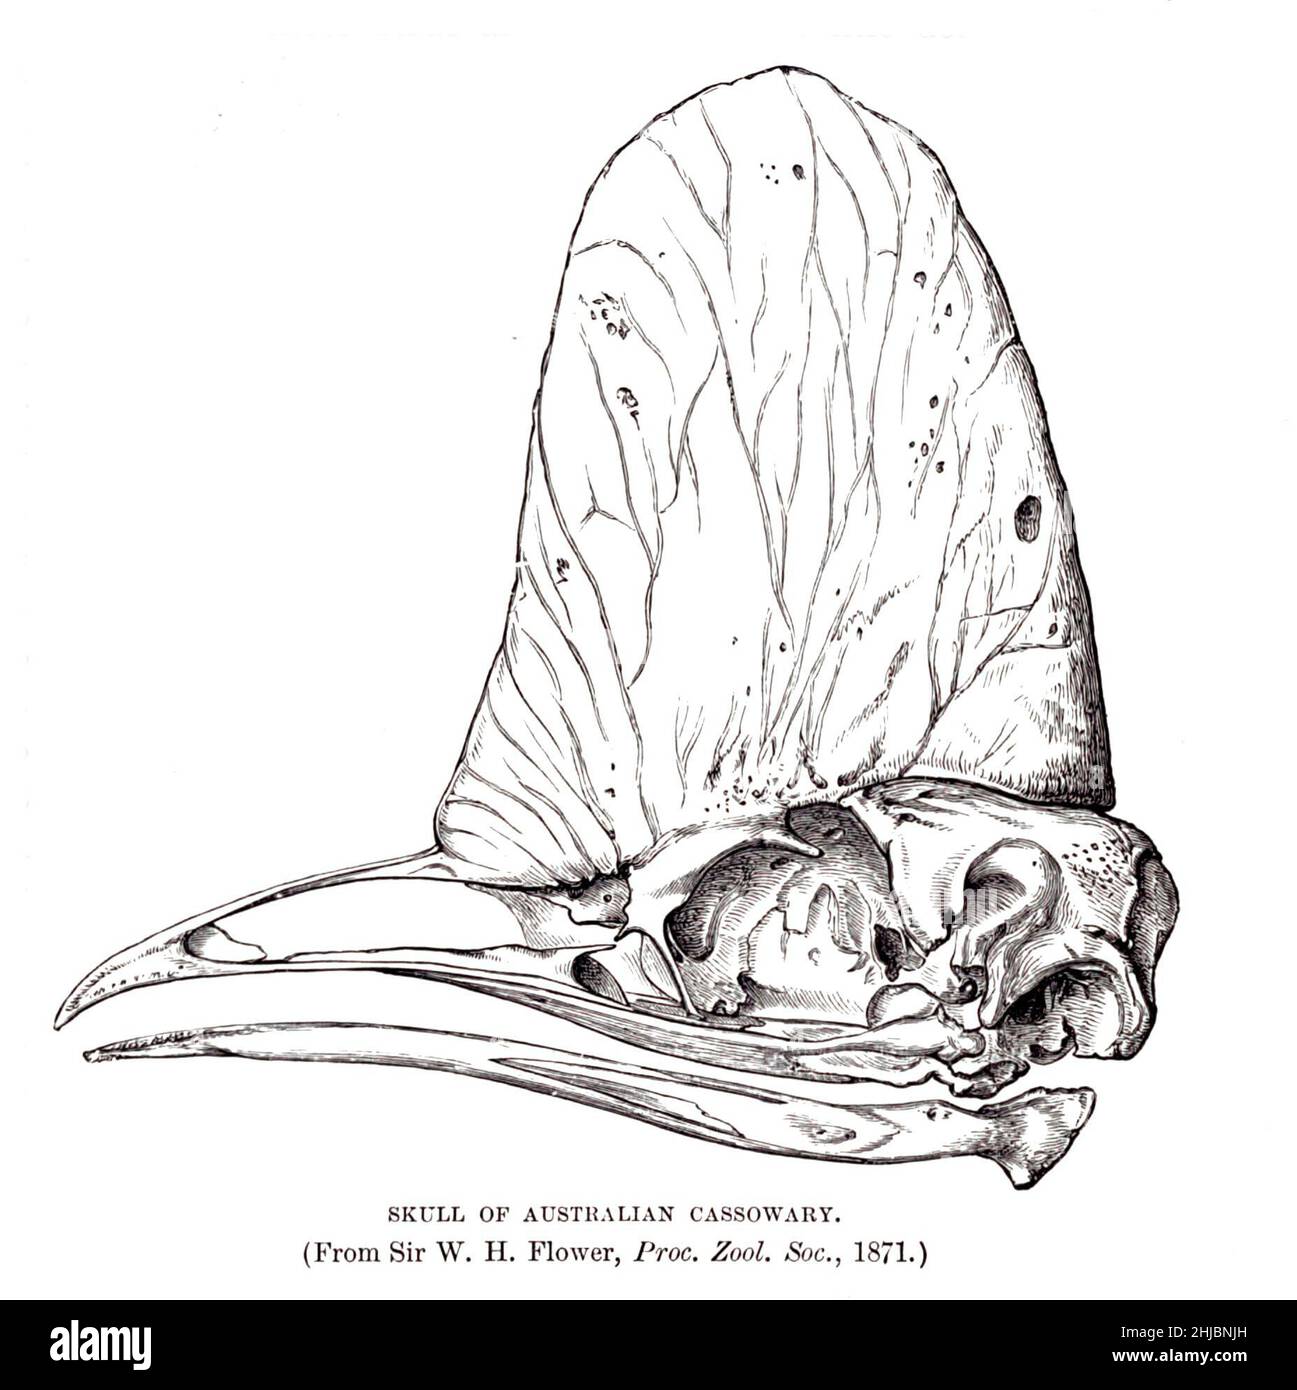 skull of the southern cassowary (Casuarius casuarius), also known as double-wattled cassowary, Australian cassowary or two-wattled cassowary, is a large flightless black bird from the The royal natural history edited by Richard Lydekker, Volume IV published in 1895 Stock Photo